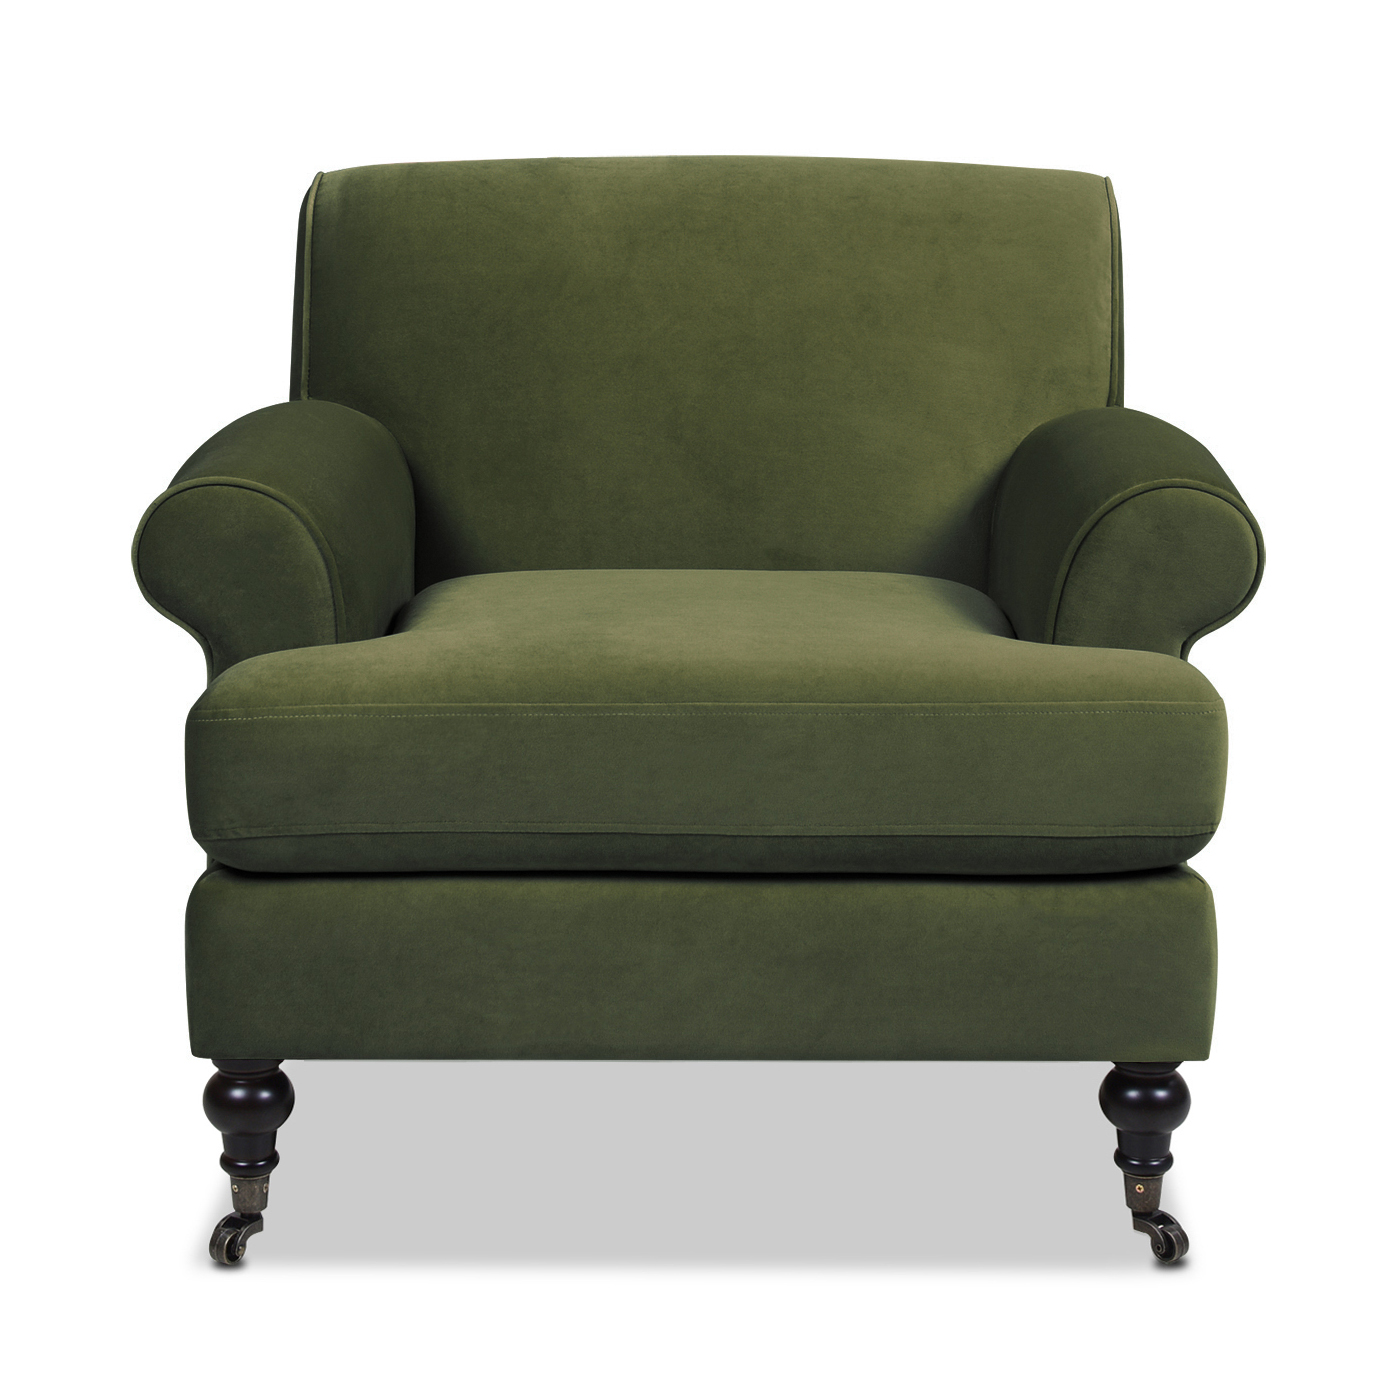 Alana Lawson Accent Arm Chair Metal Casters, Olive Green